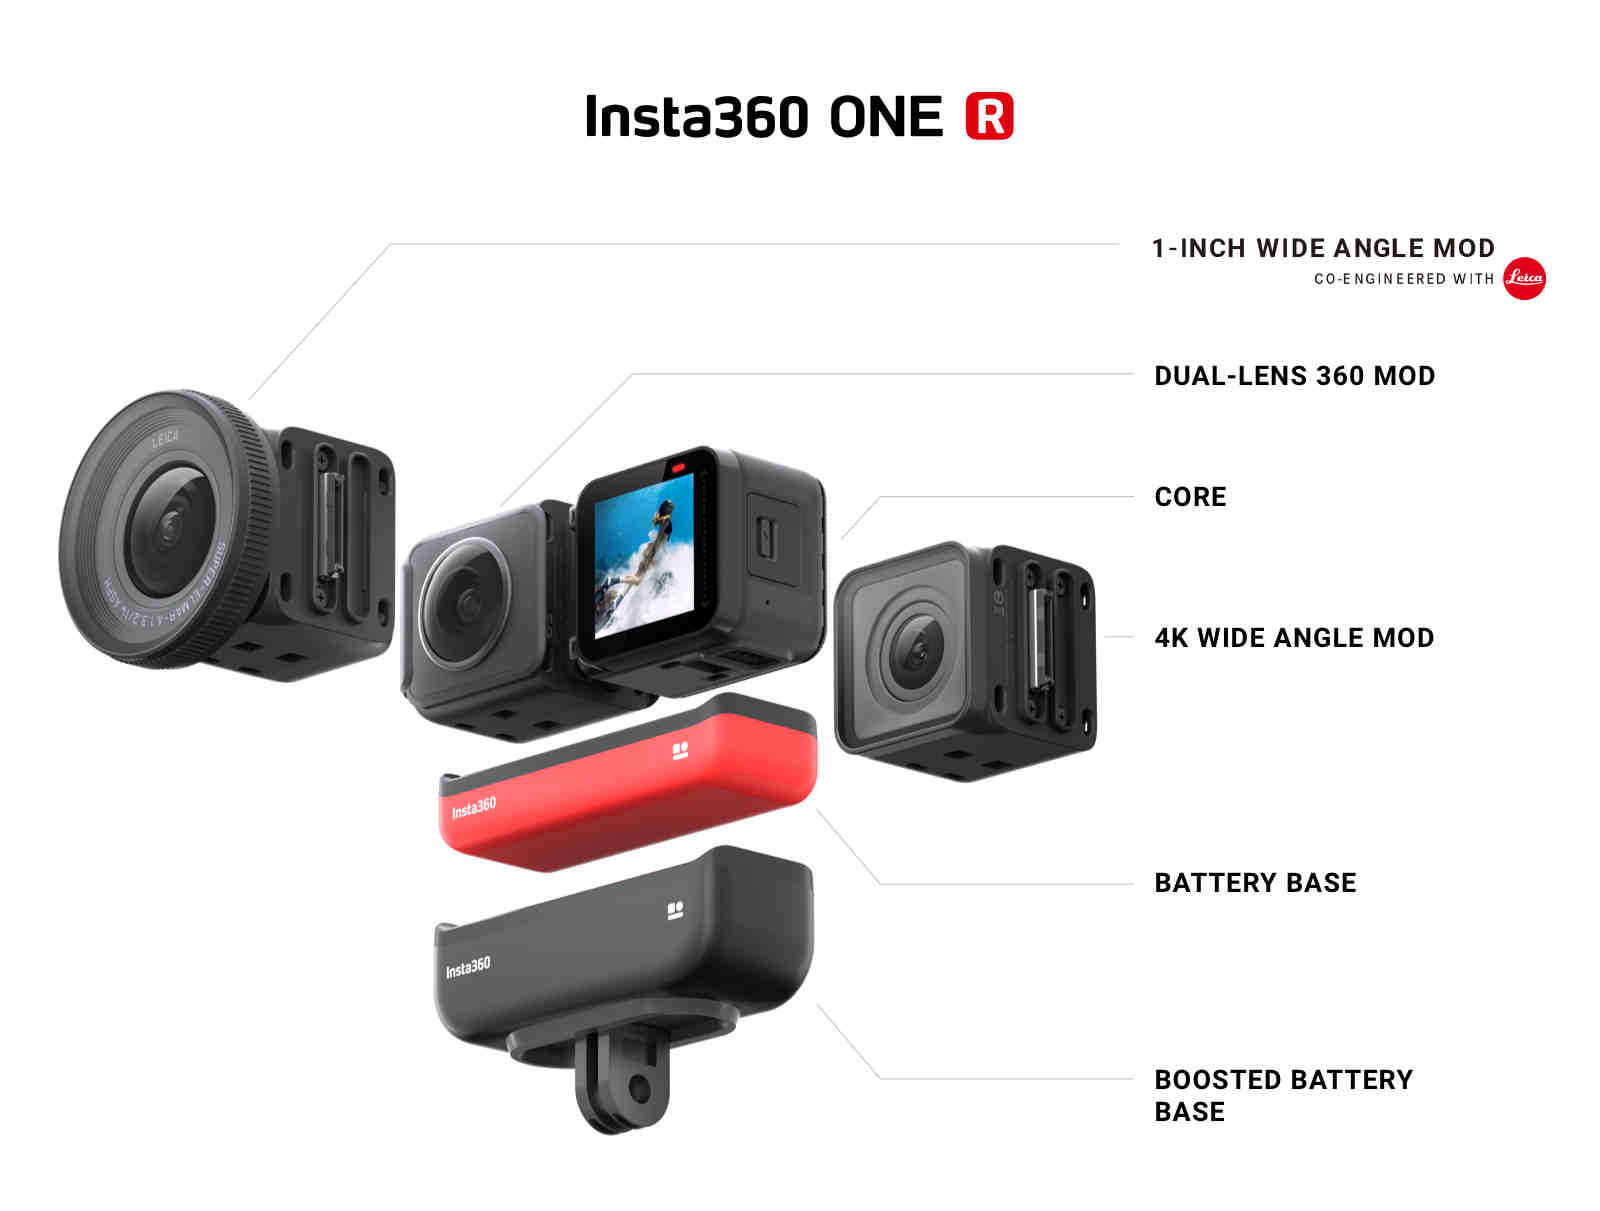 How do I charge my Insta360 battery?